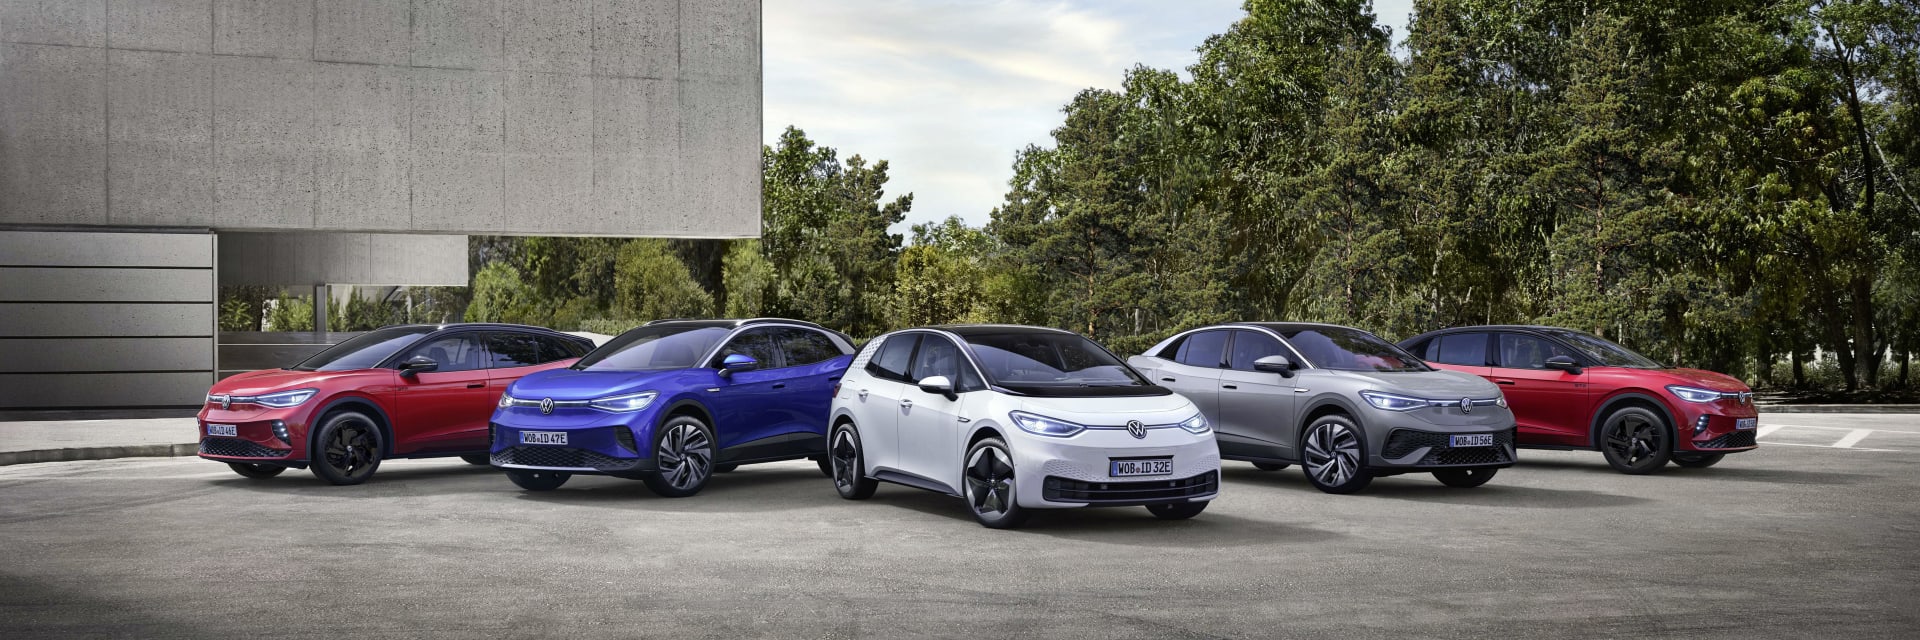 Volkswagen ID Range Available For Immediate Delivery